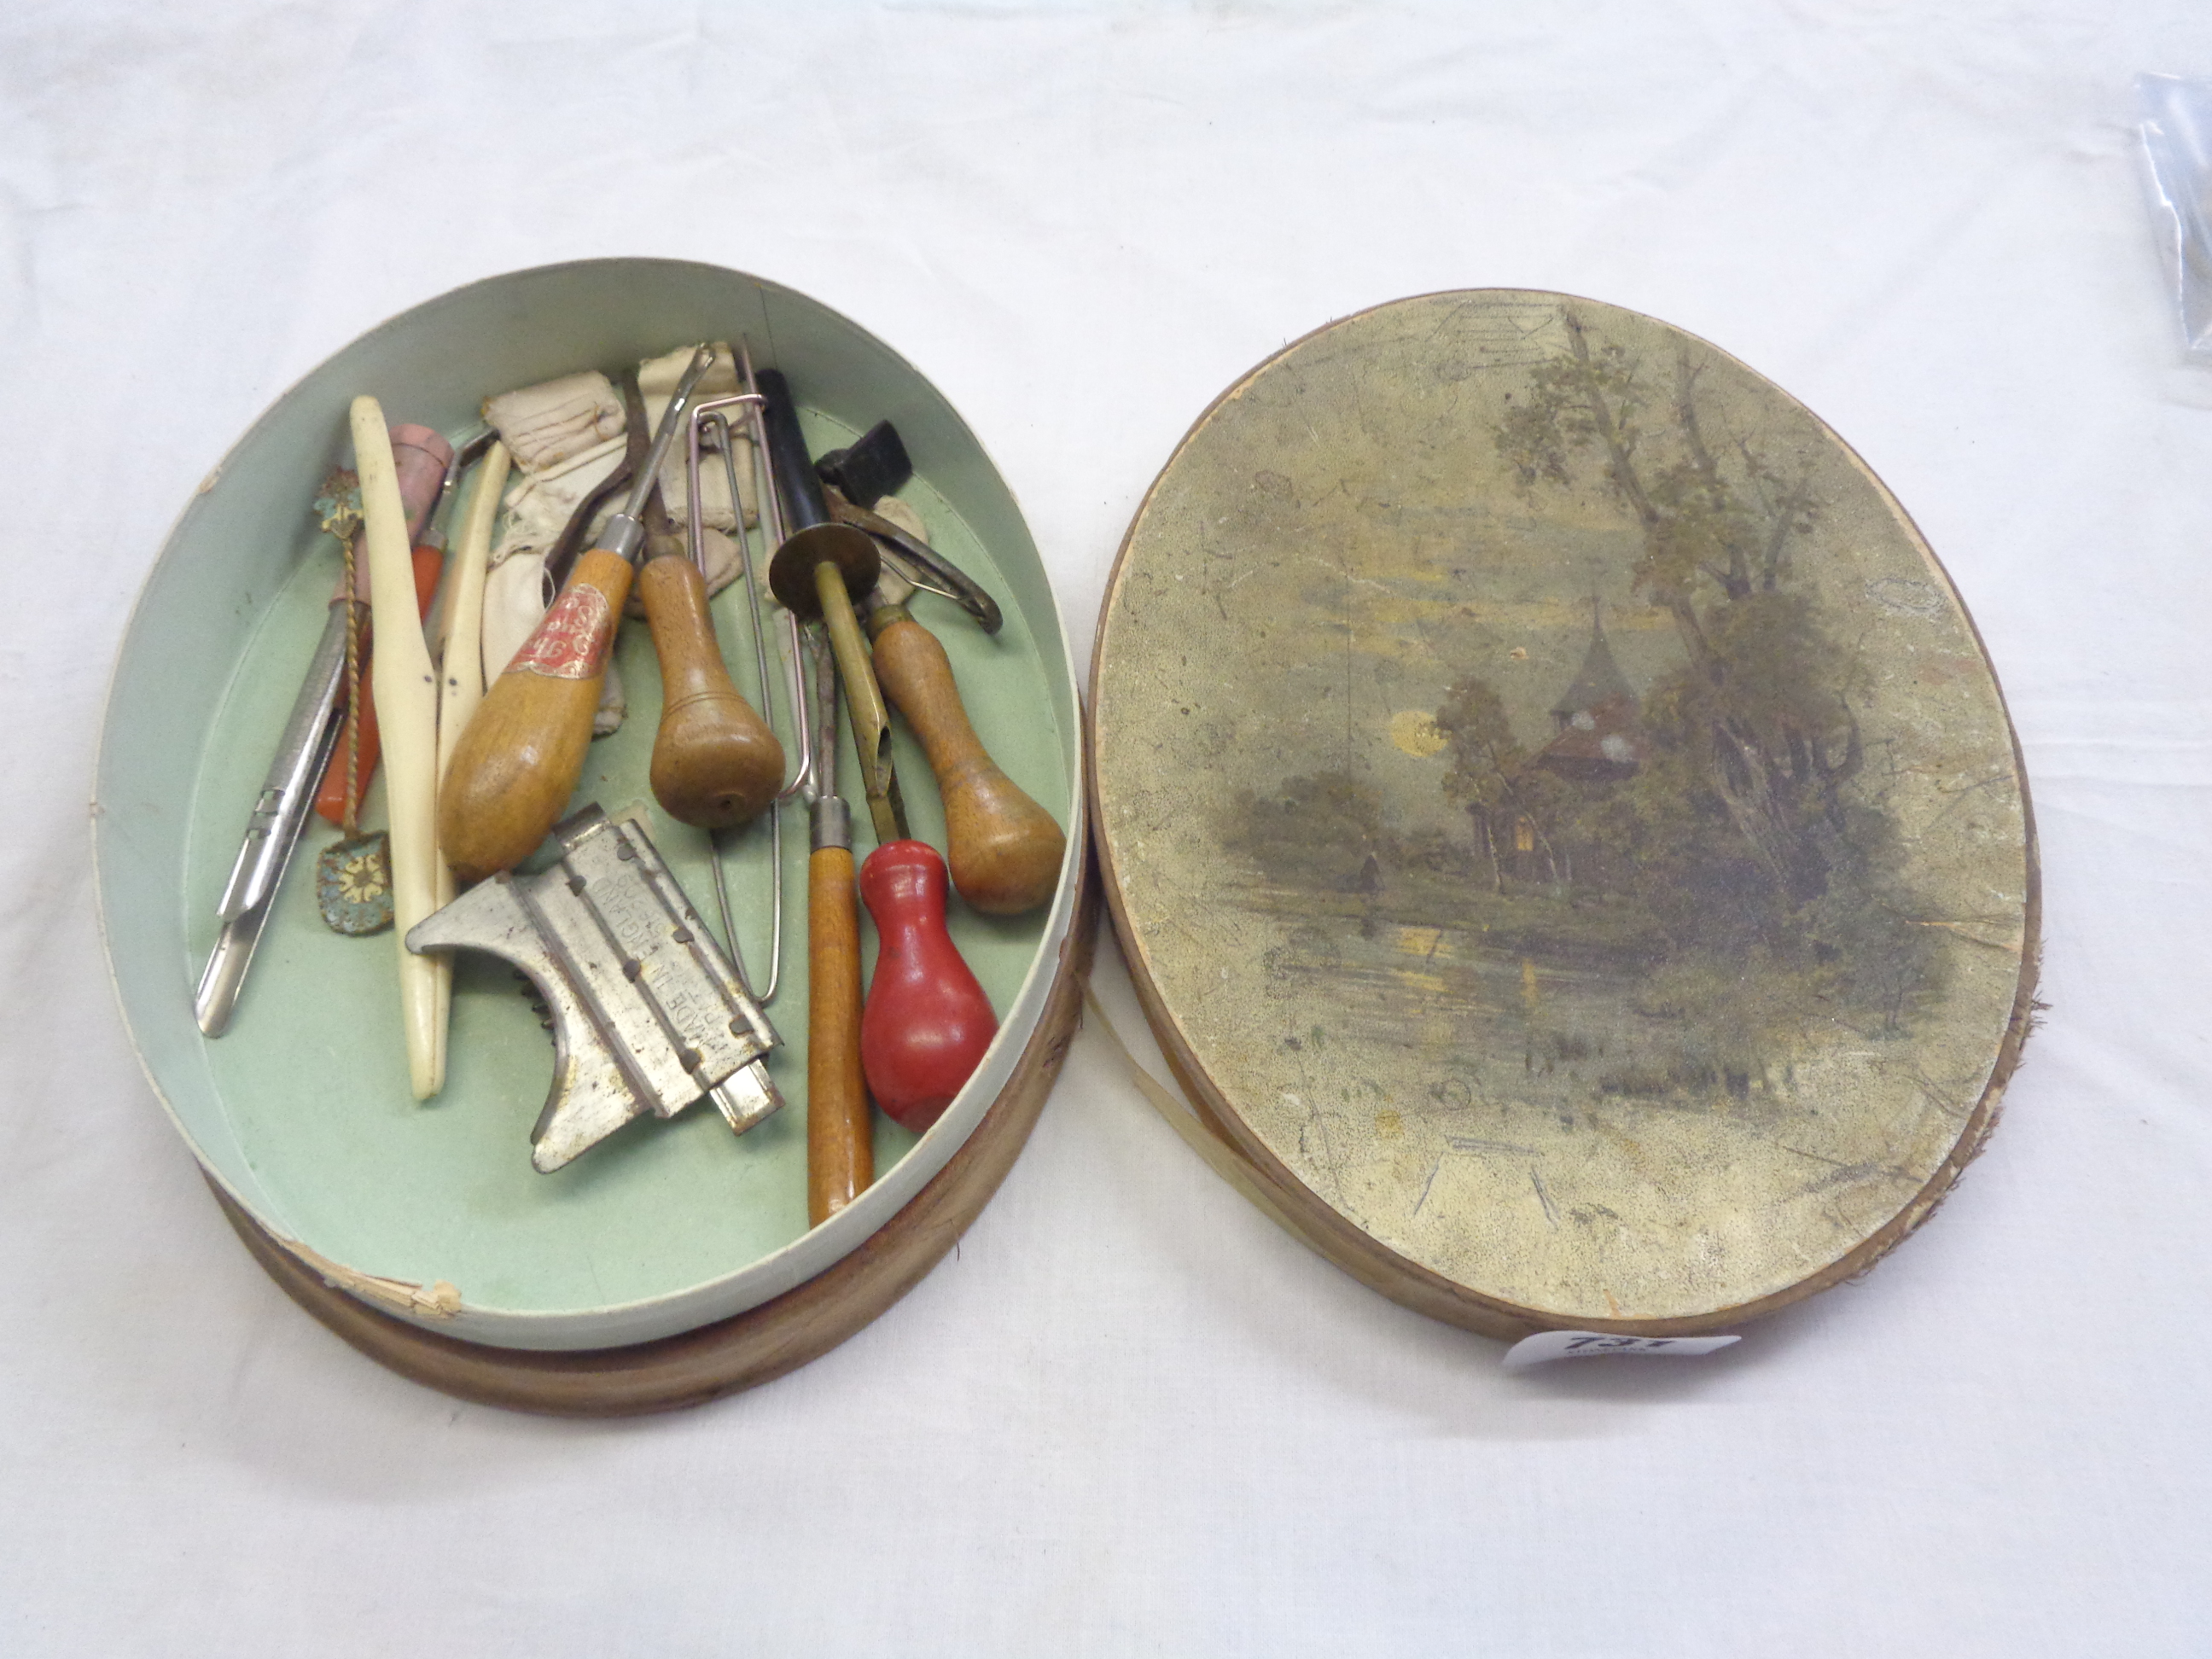 An old Cadbury's chocolate box containing assorted sewing implements, etc.